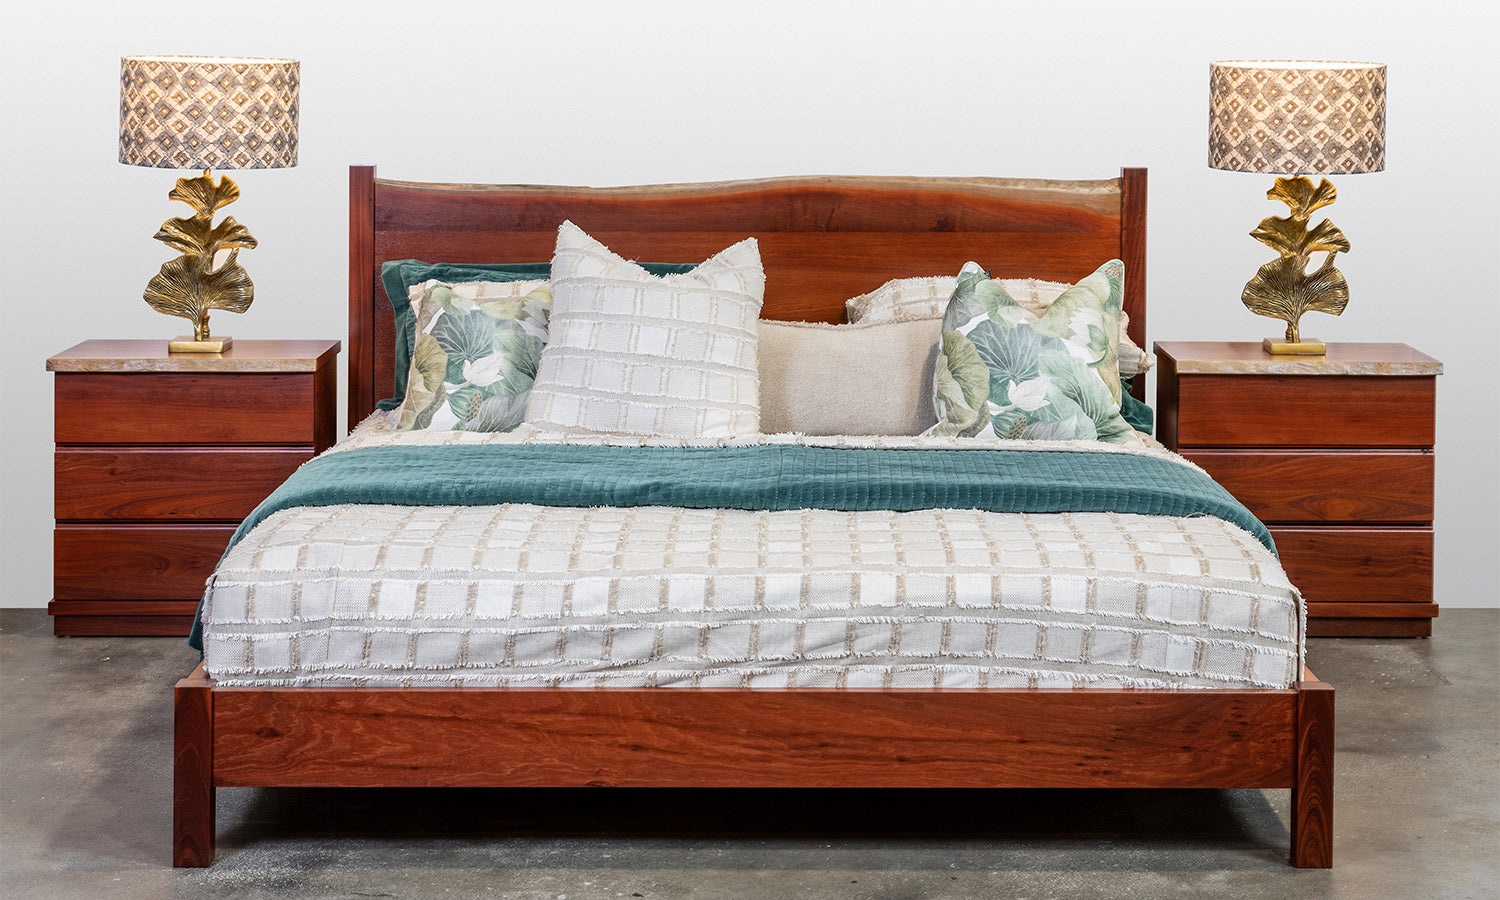 Naturaliste Natural Edge Solid Jarrah Timber Queen or King Bed and Bedroom Suite Made in Perth, WA